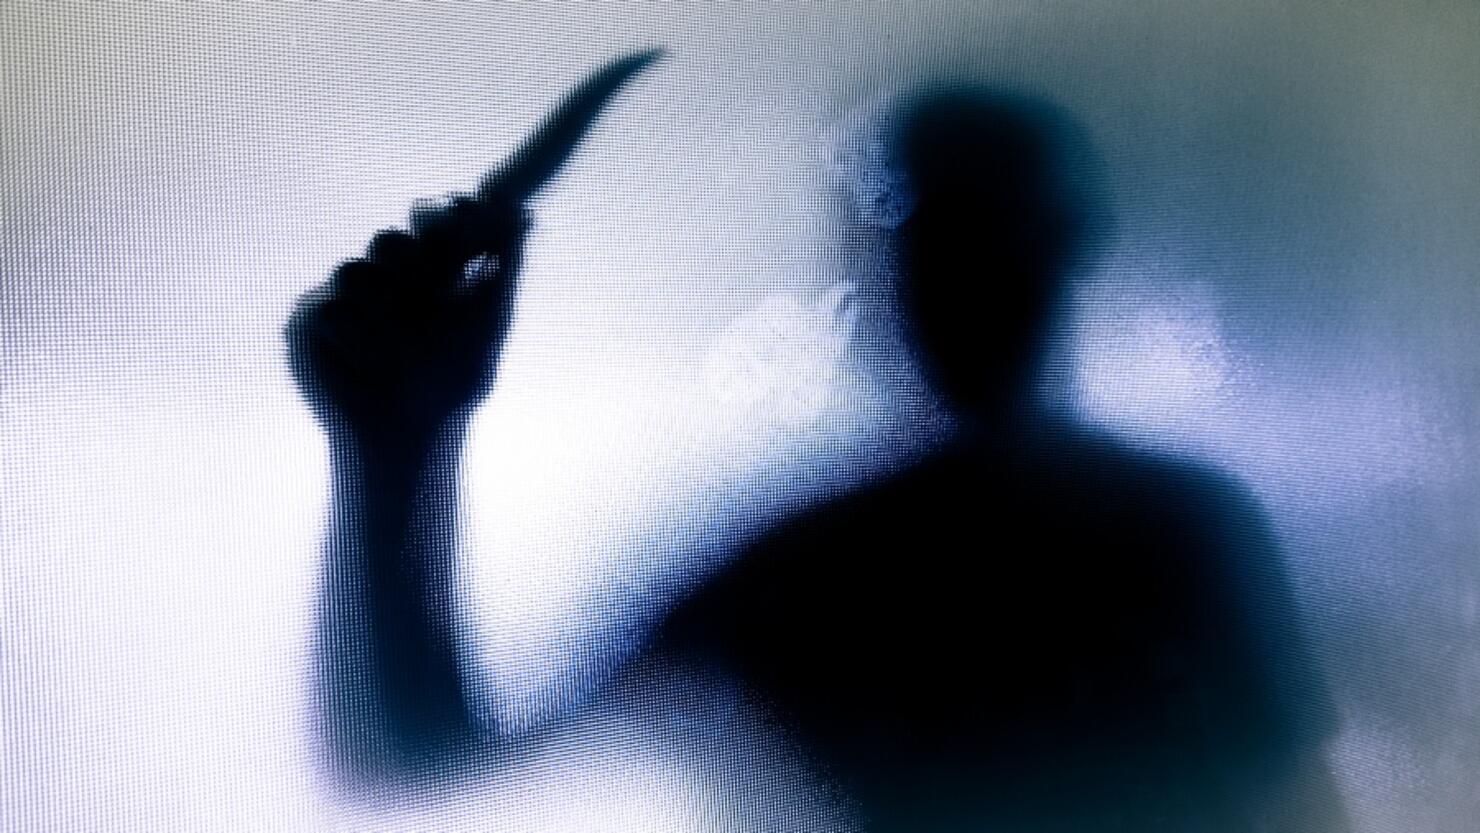 Violent threatening silhouette of man wielding a knife behind frosted glass window